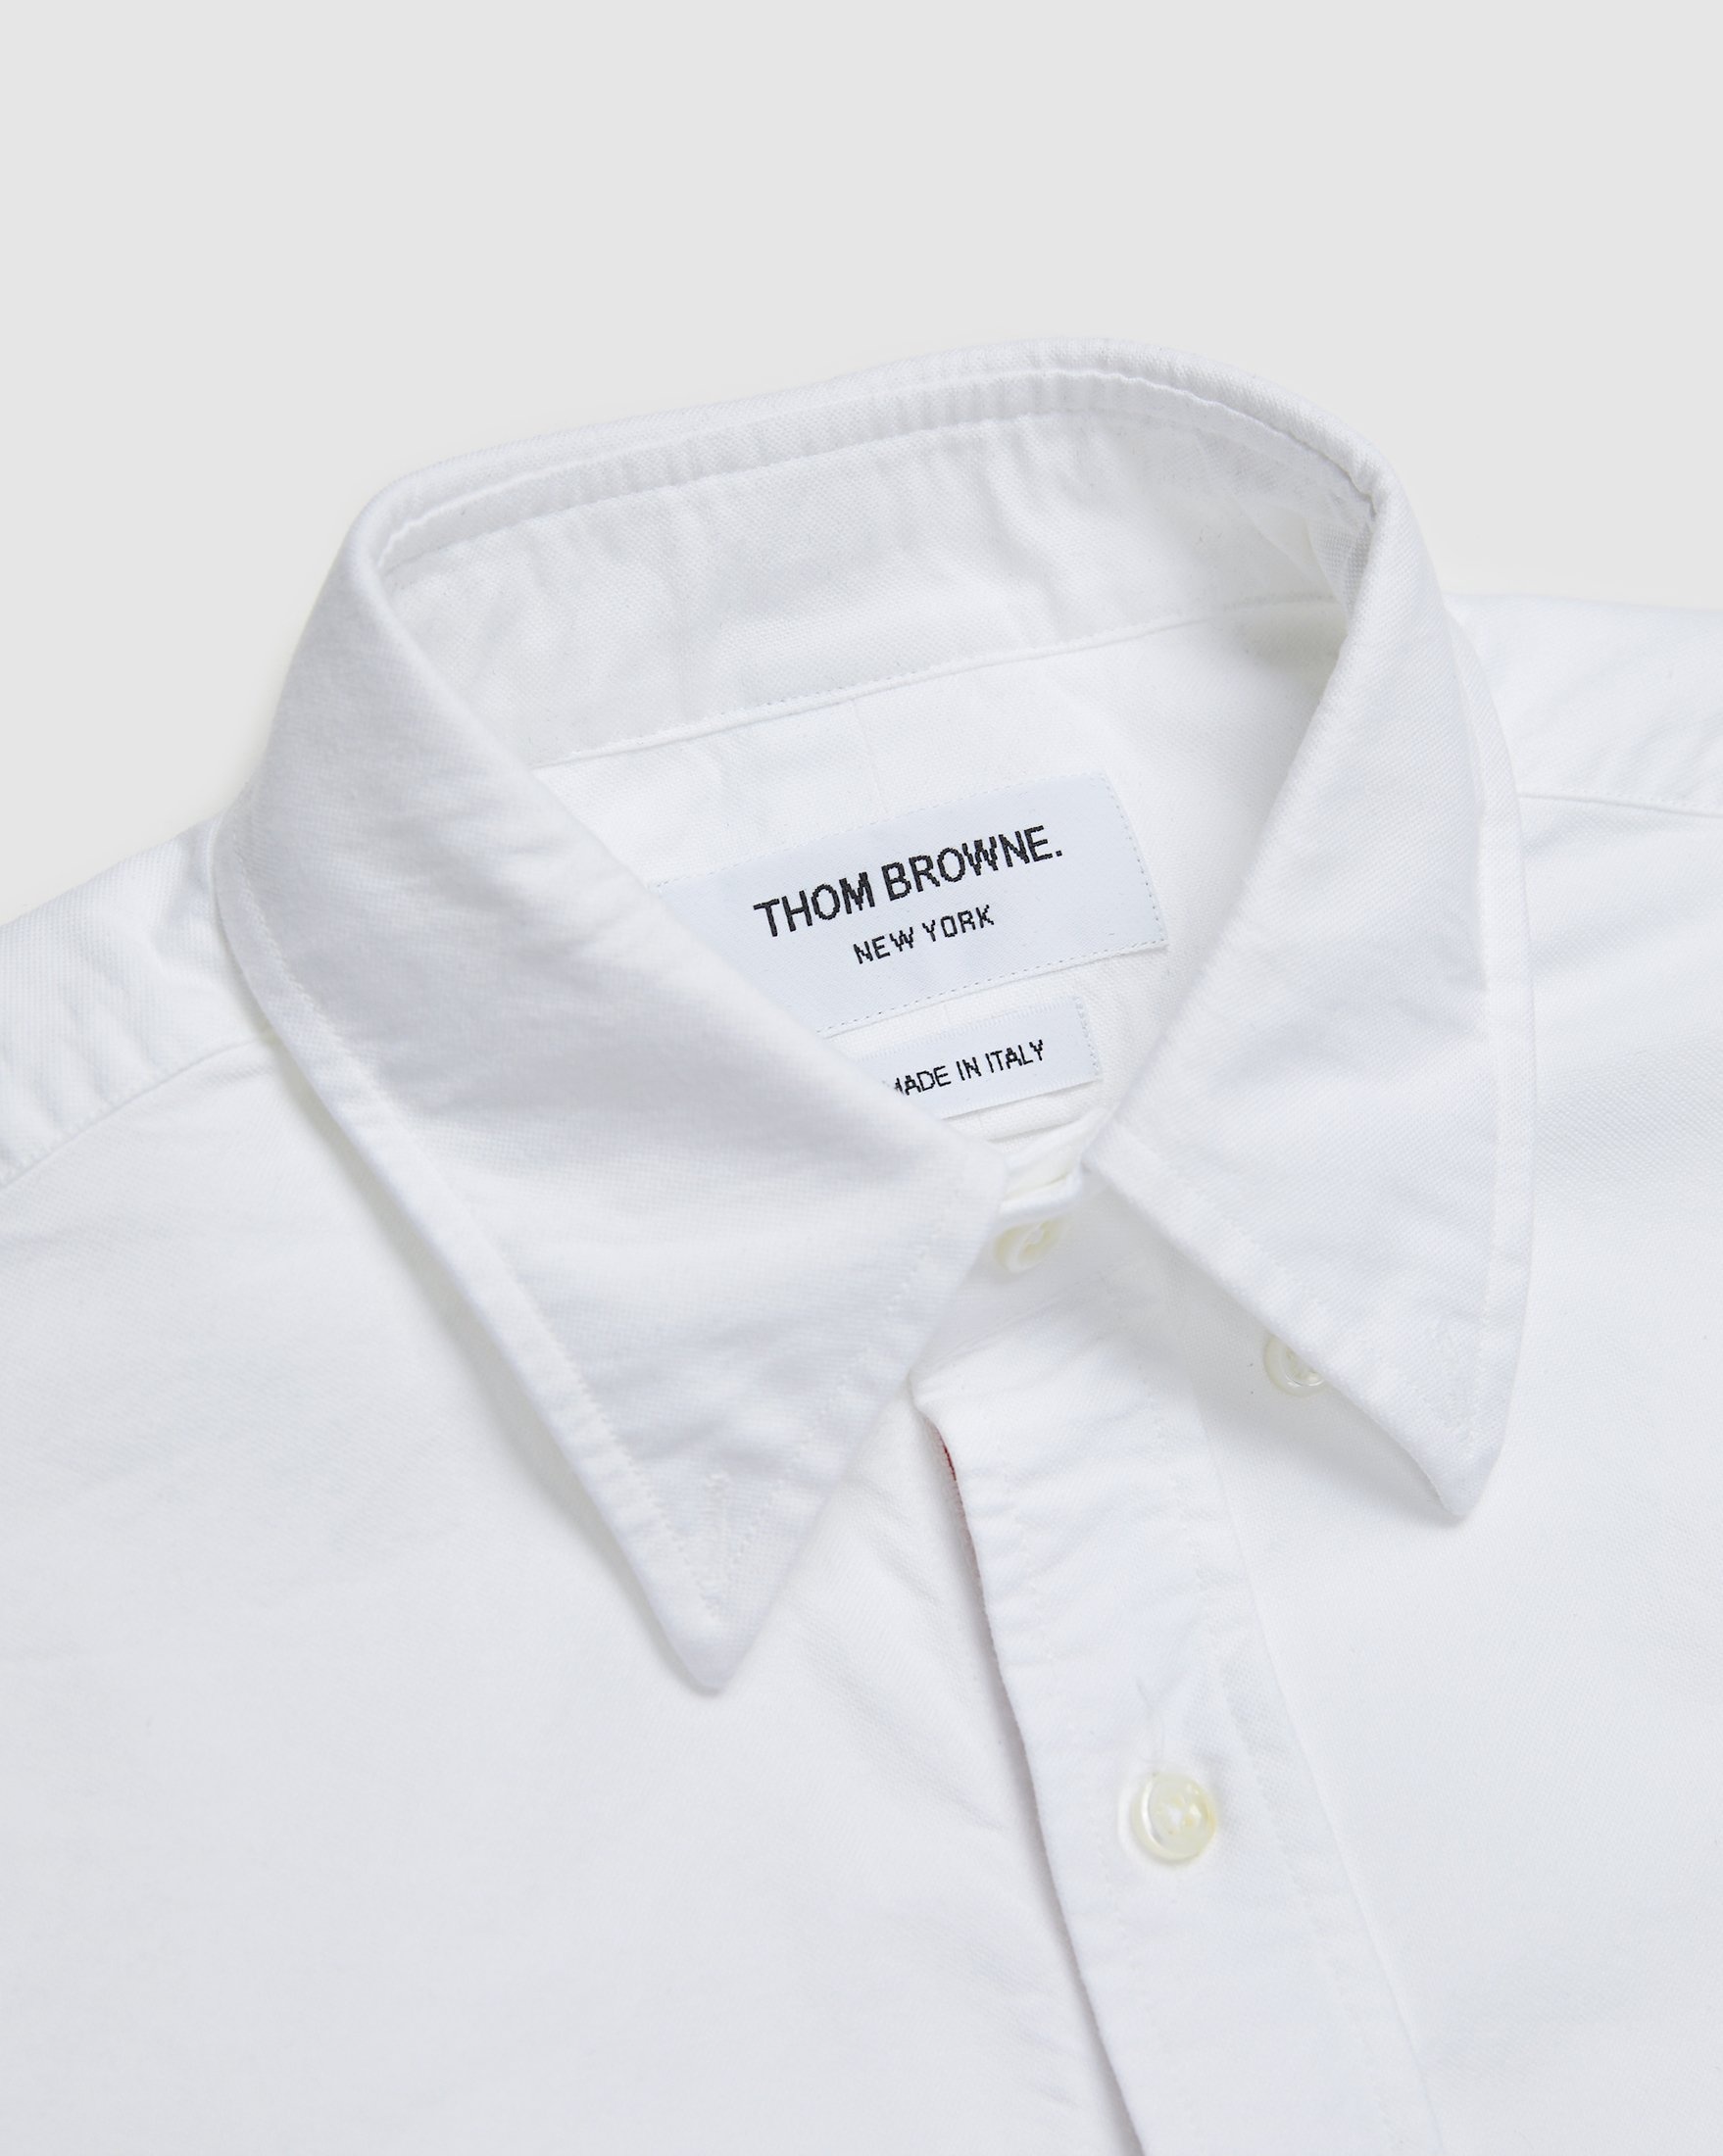 Colette Mon Amour x Thom Browne – White Peace Classic Shirt - Longsleeve Shirts - White - Image 3